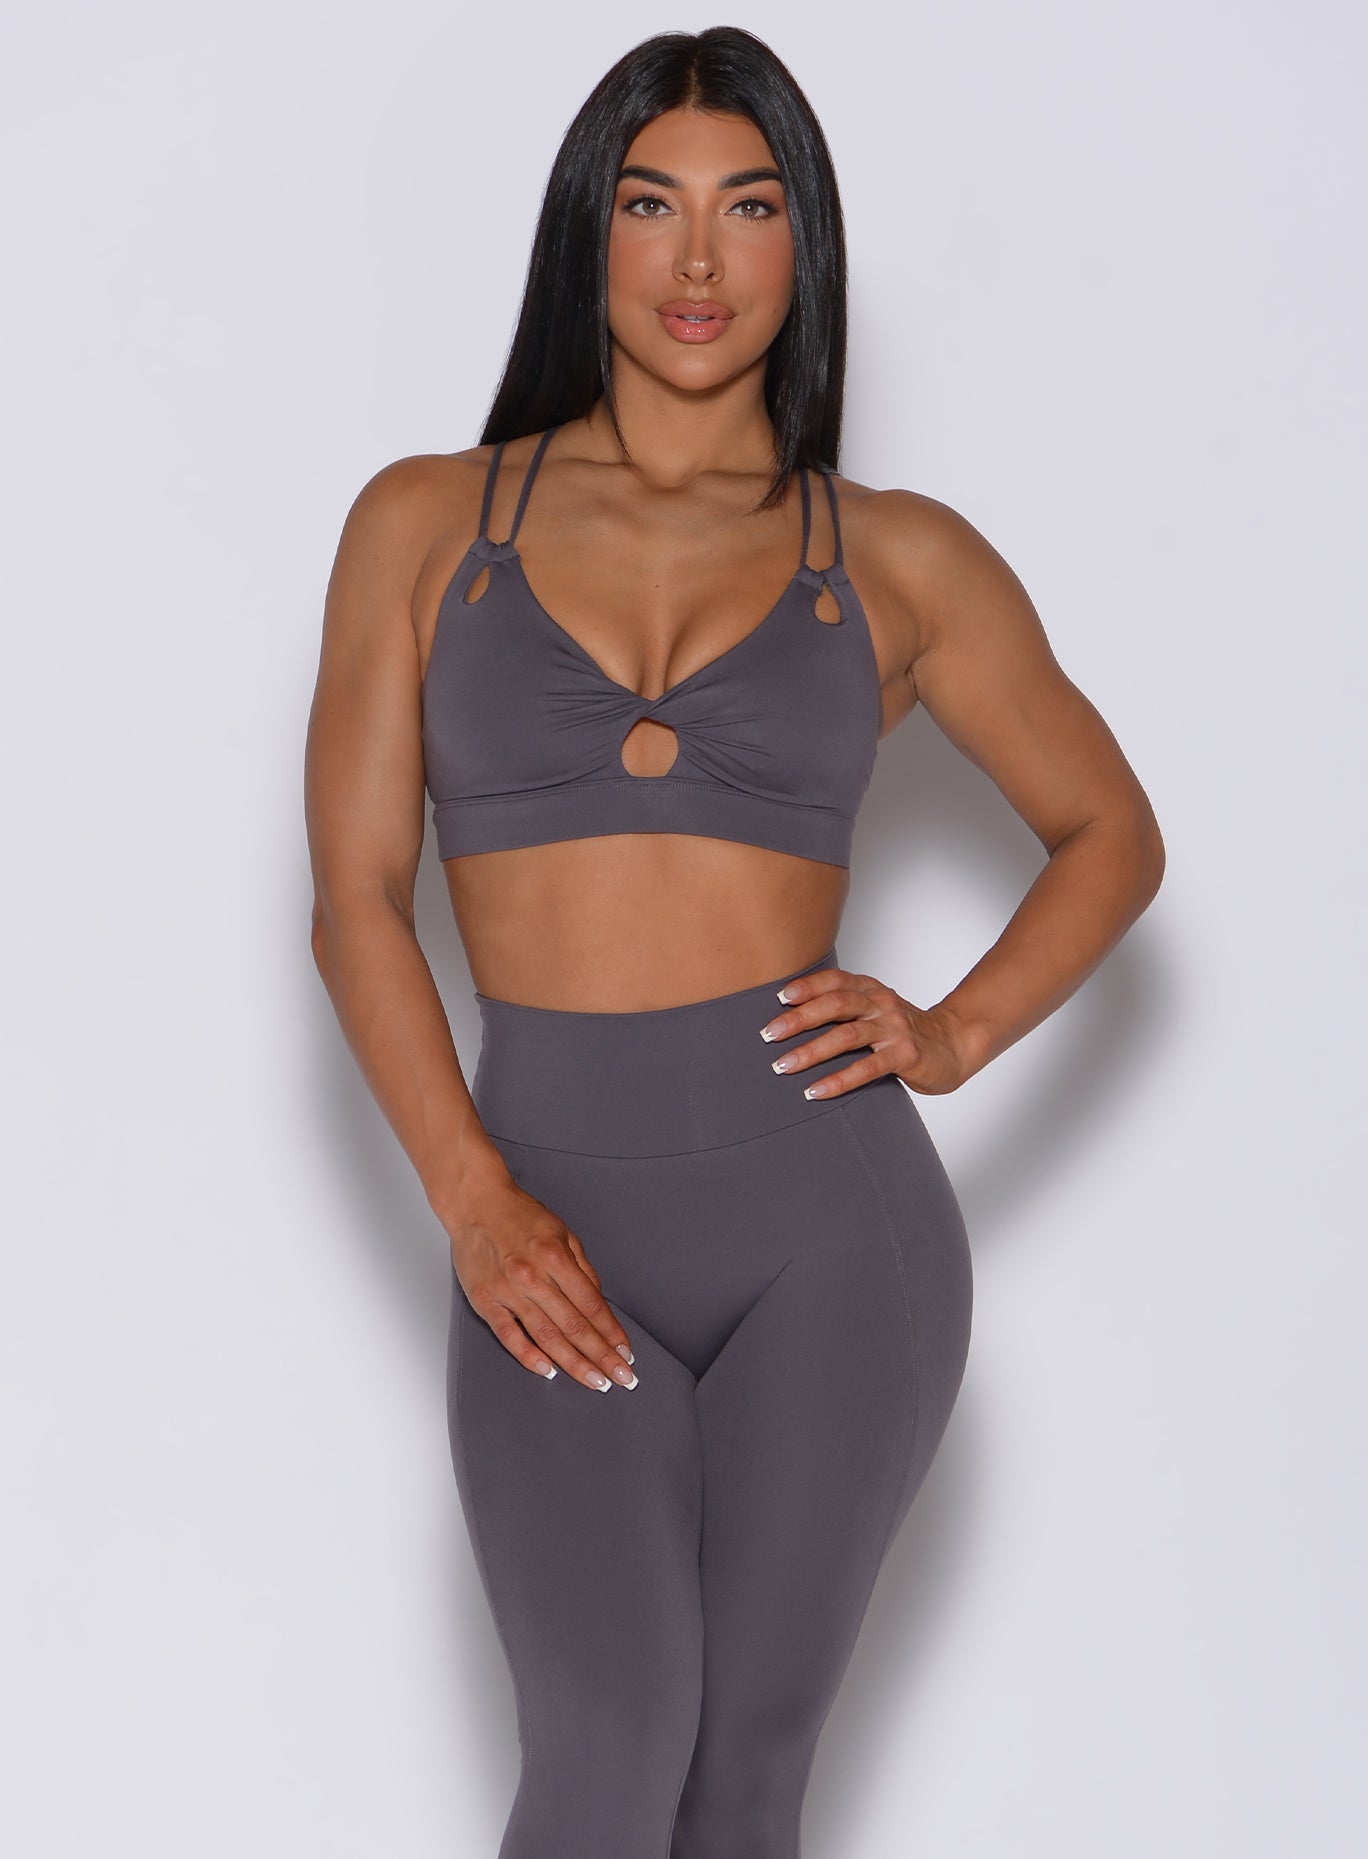 Front profile view of a model with her left hand on waist wearing our twist sports bra in gray smoke color and a matching leggings